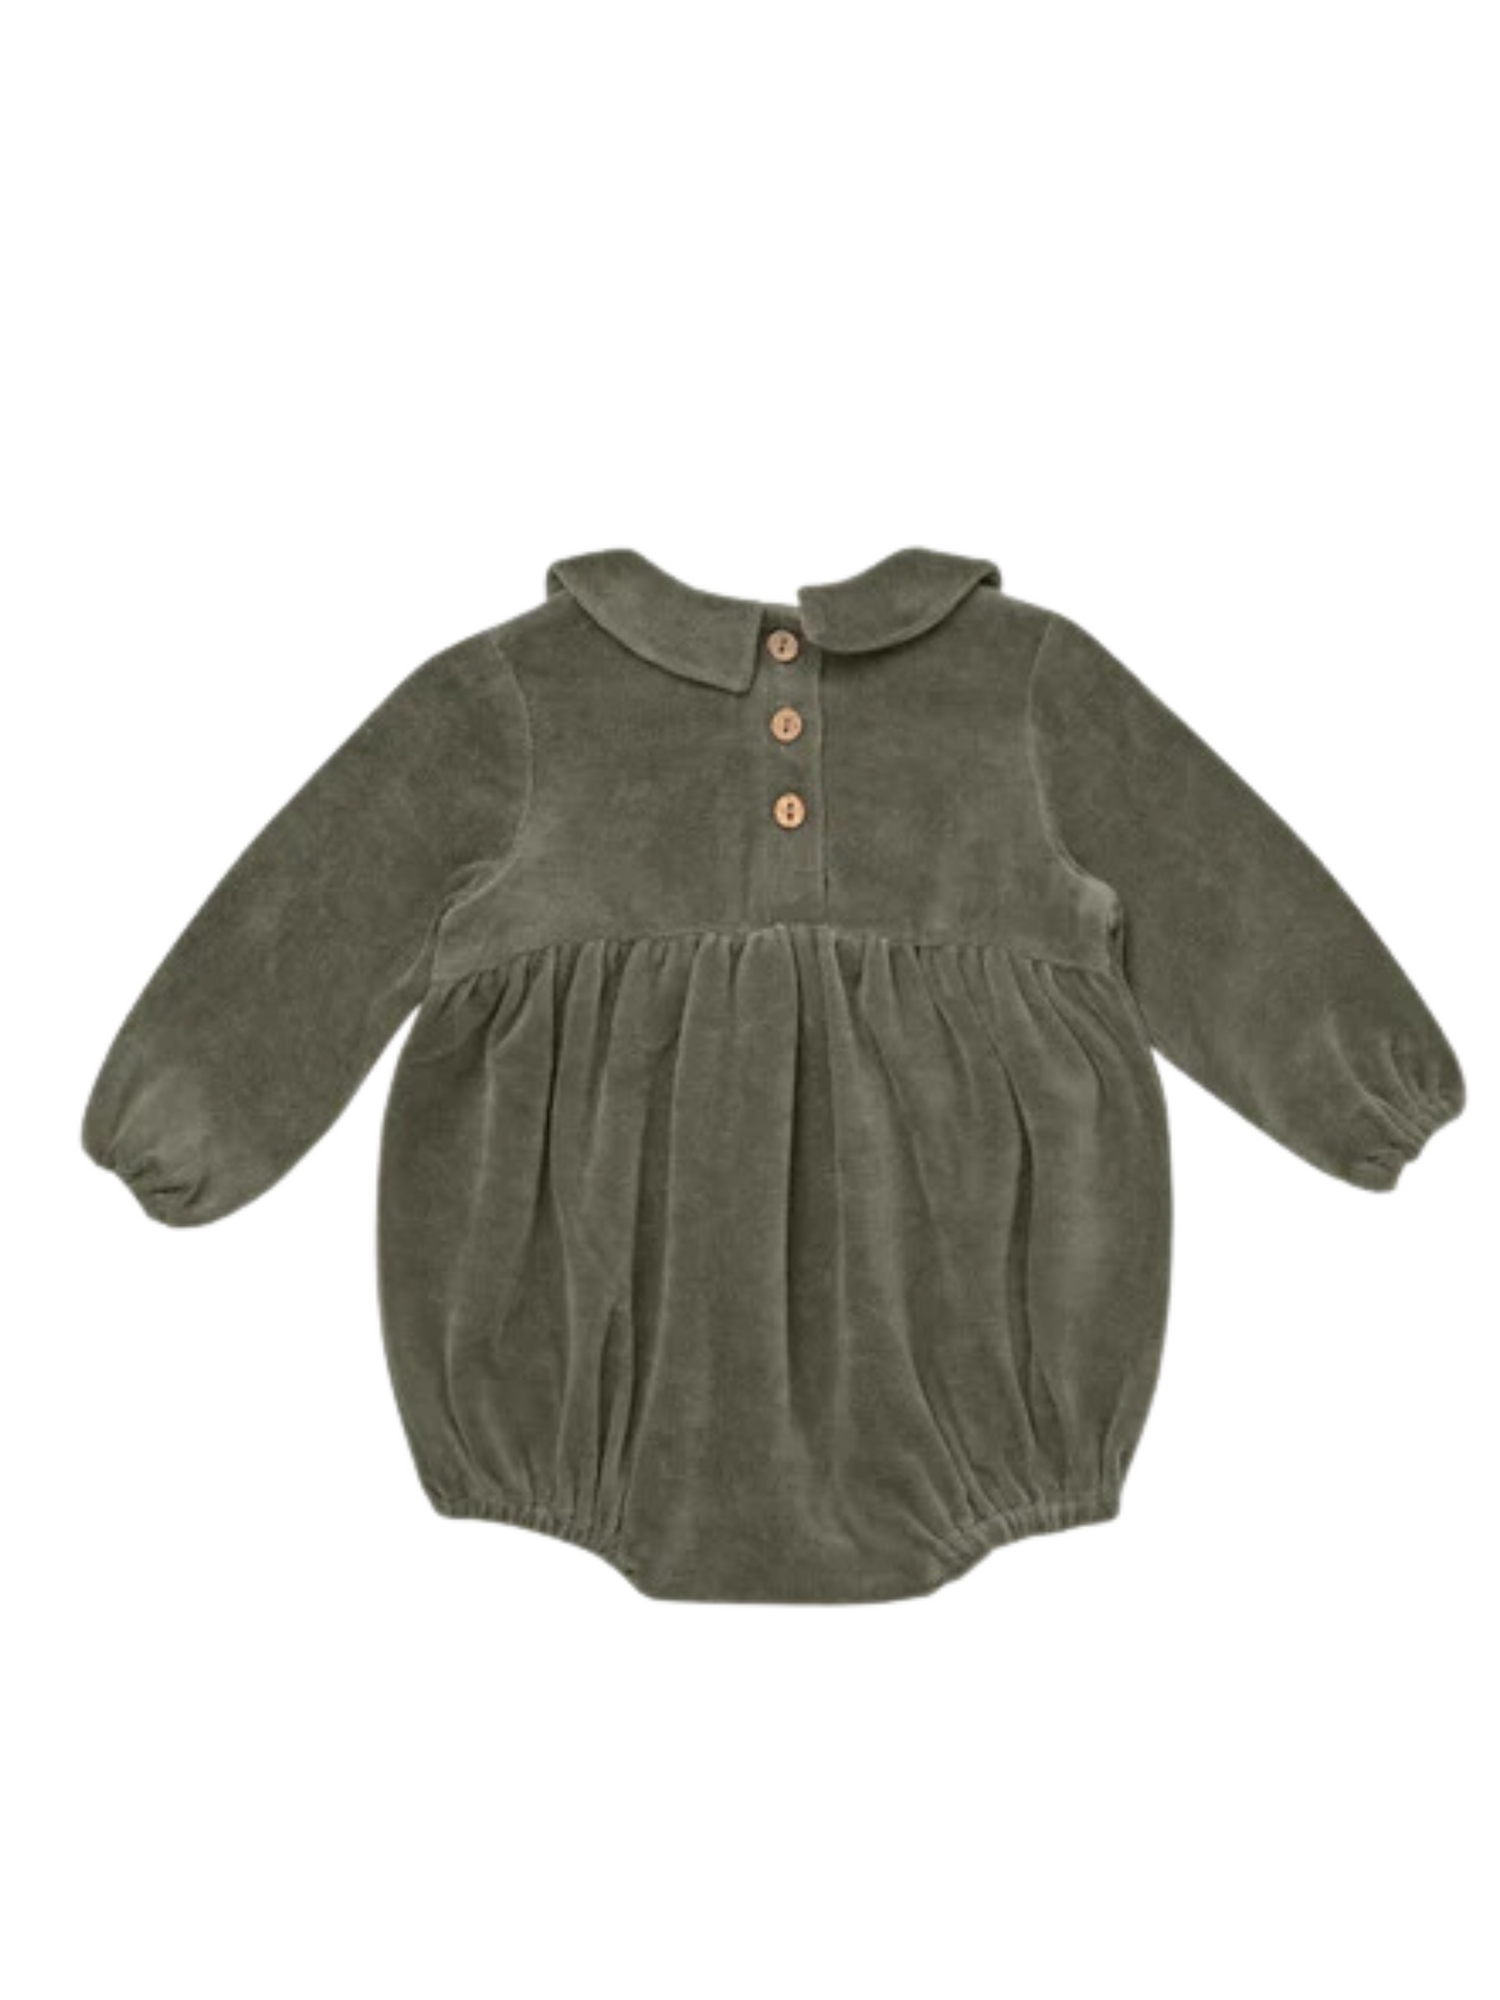 QUINCY MAE PETER PAN ROMPER IN FOREST - THE LITTLE EAGLE BOUTIQUE